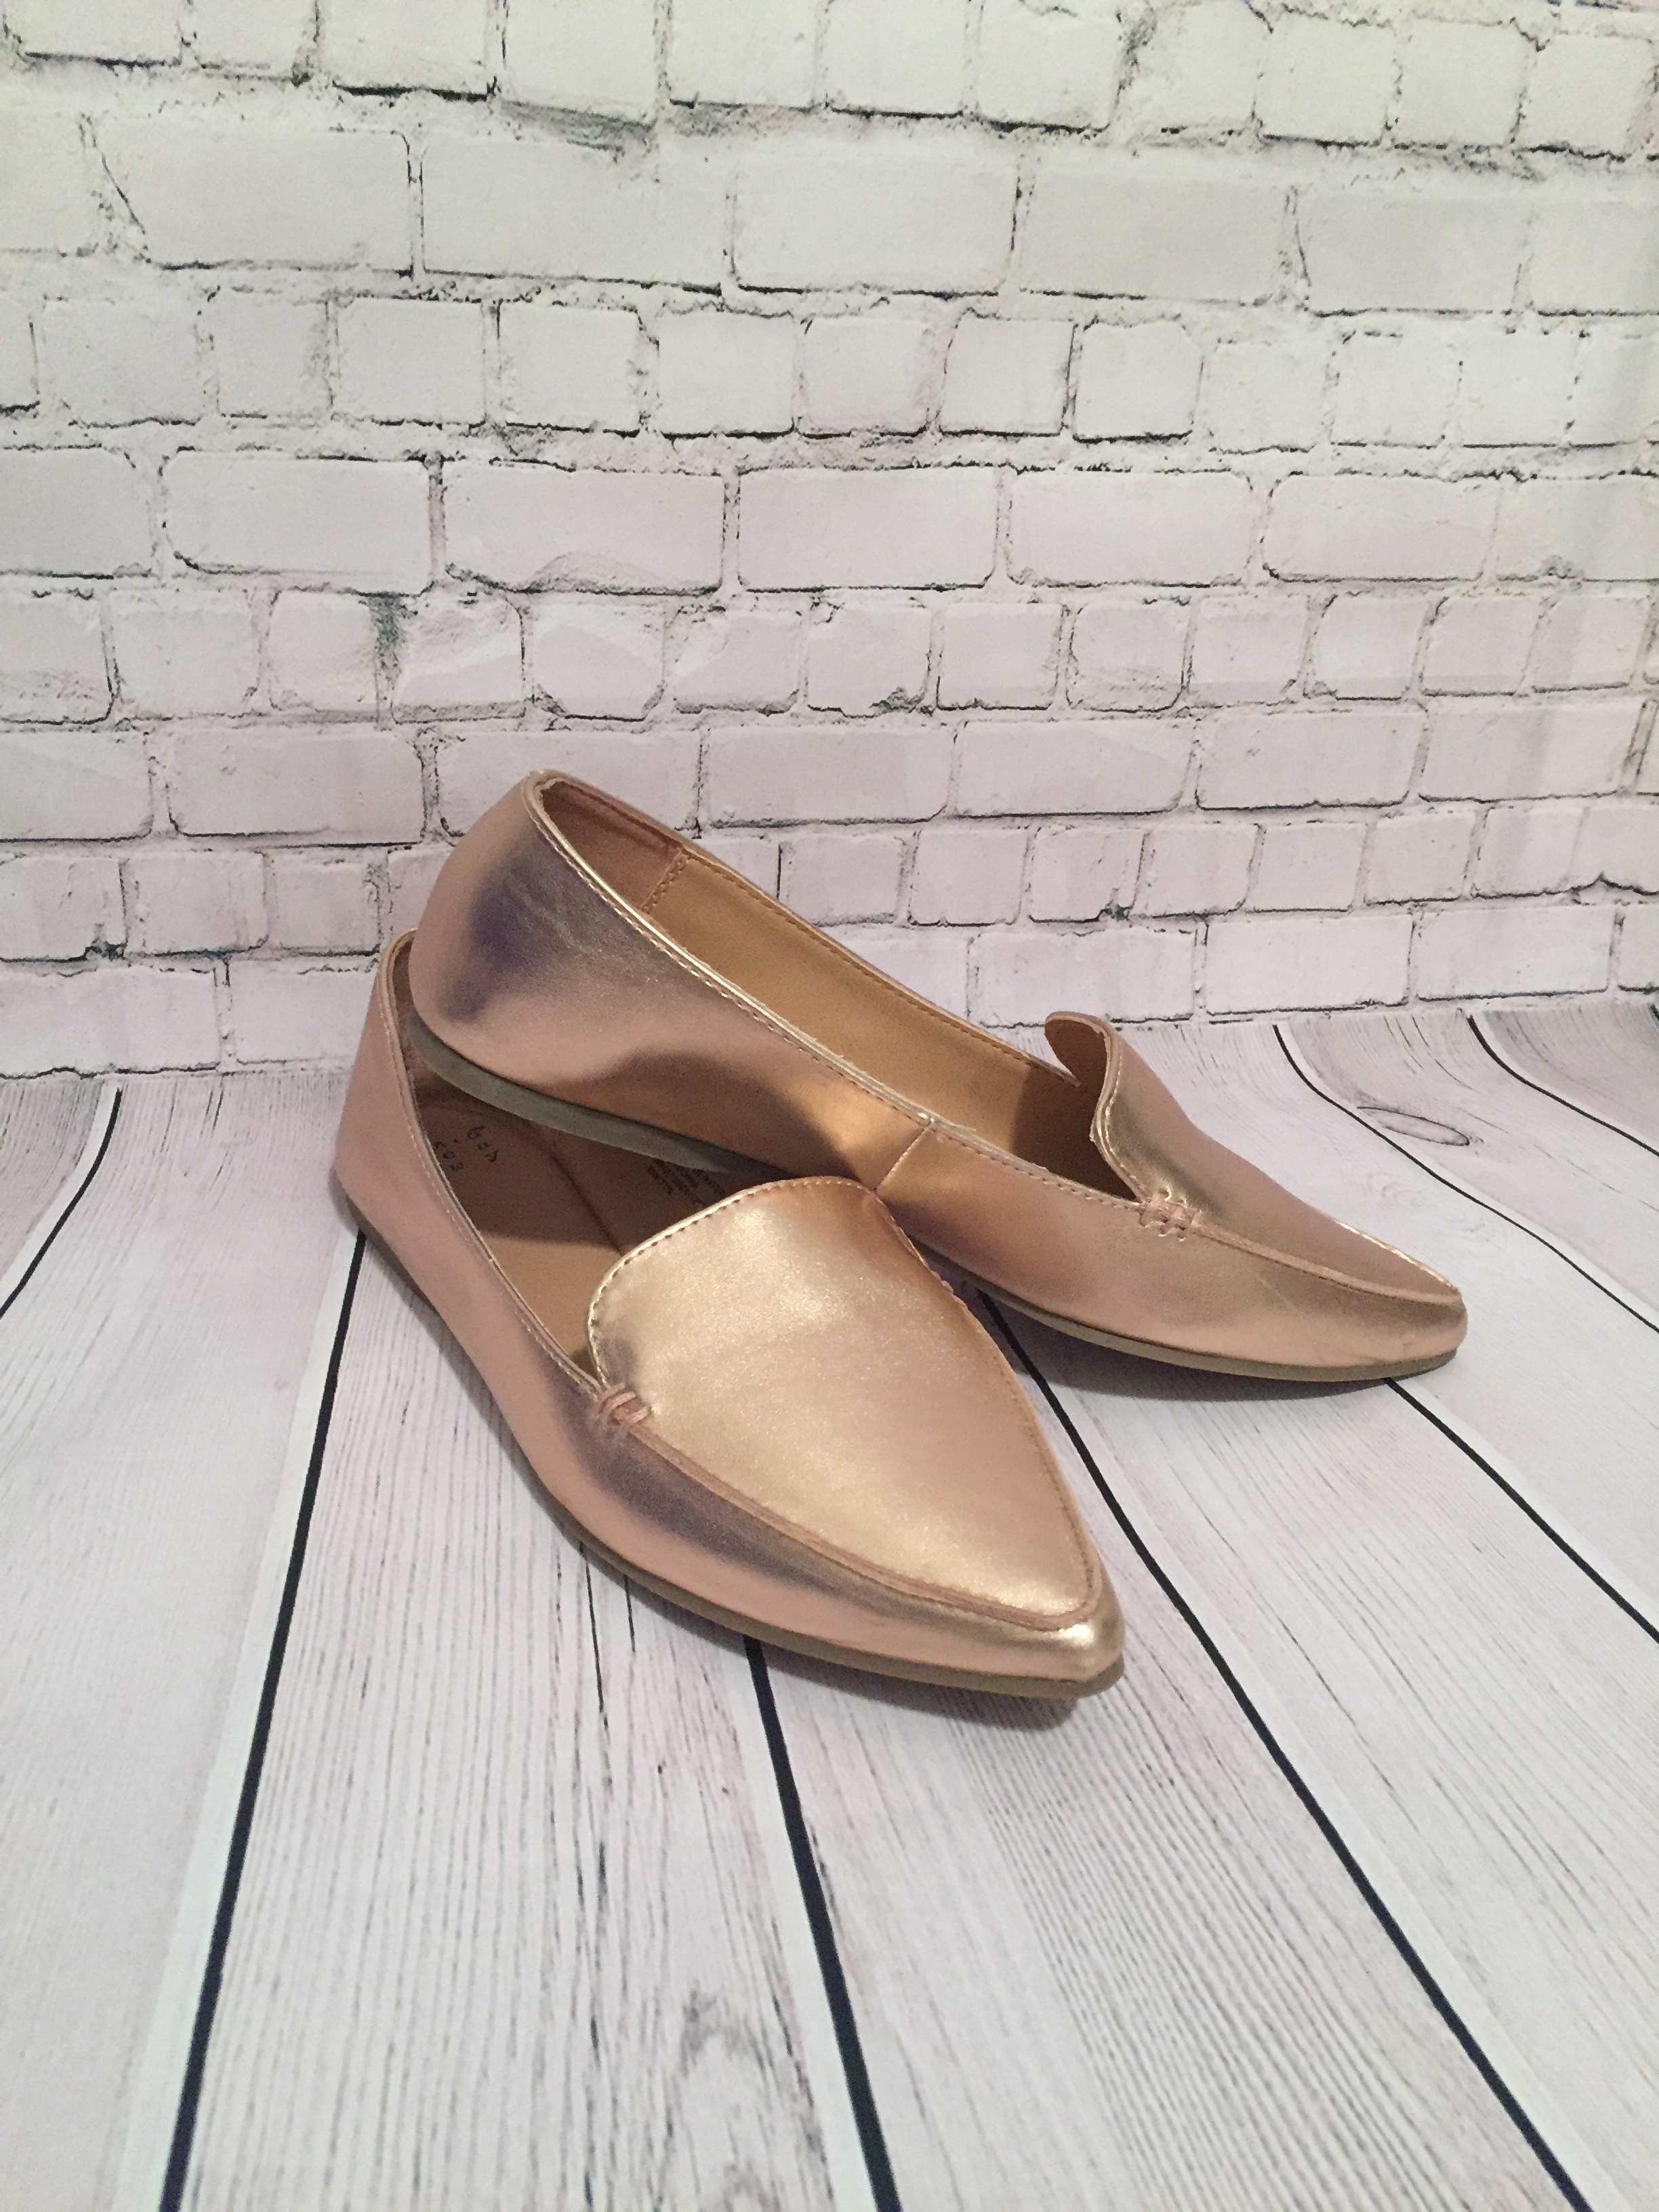 Target rose gold shoes | Polished Chaos